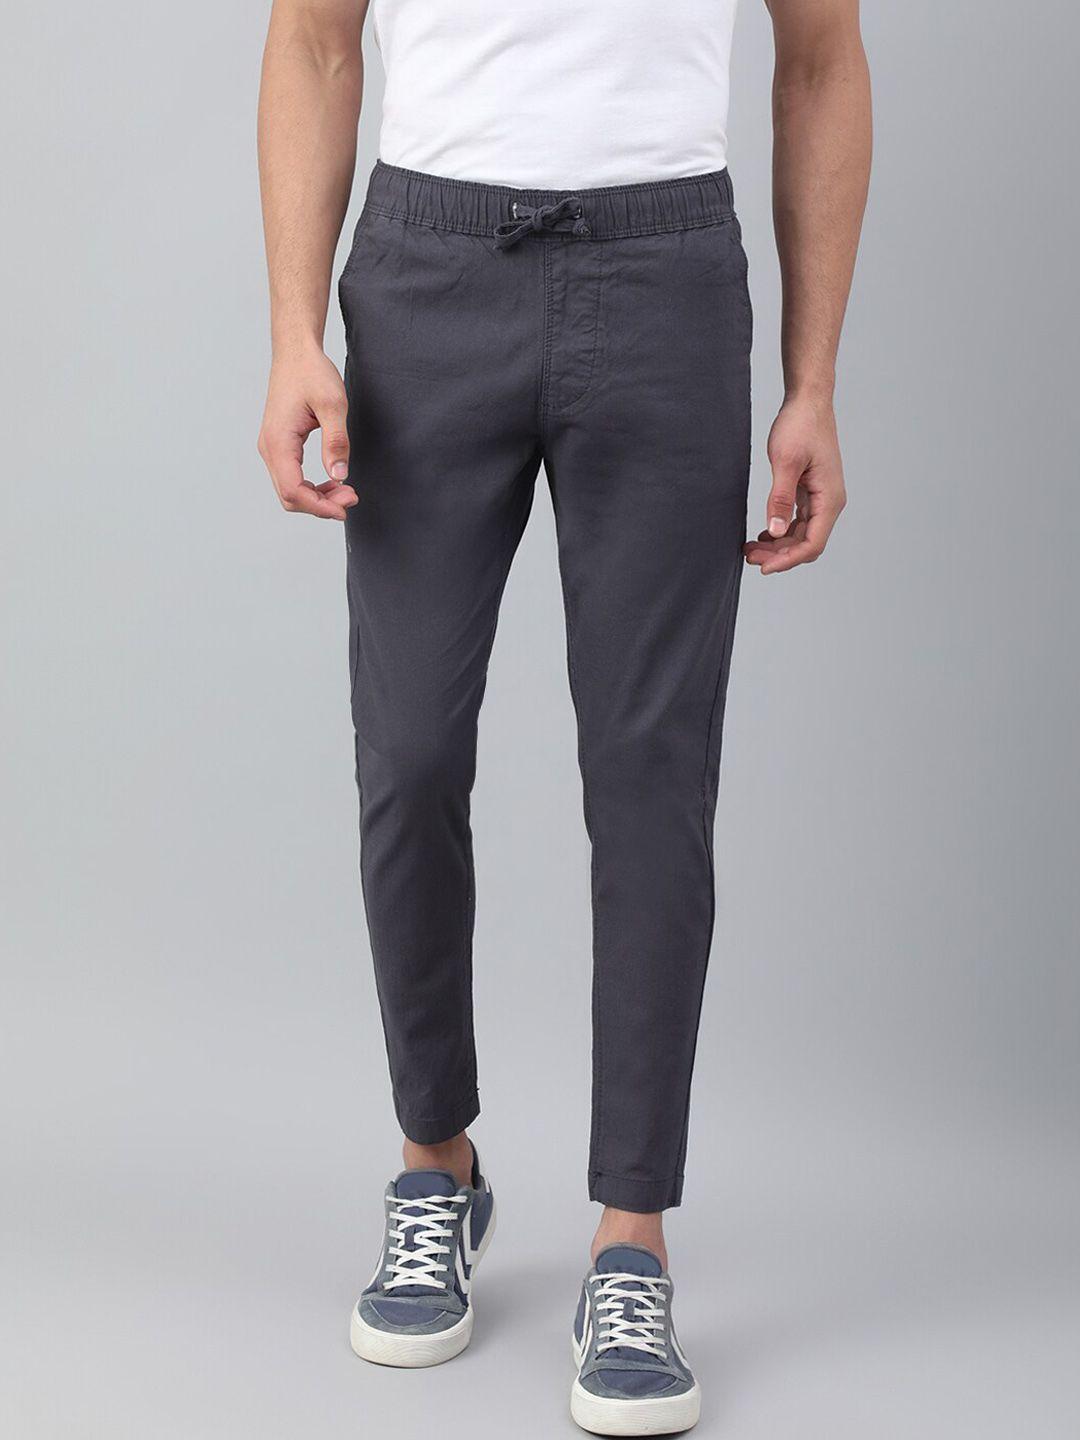 code 61 men charcoal low-rise stretchable jogger